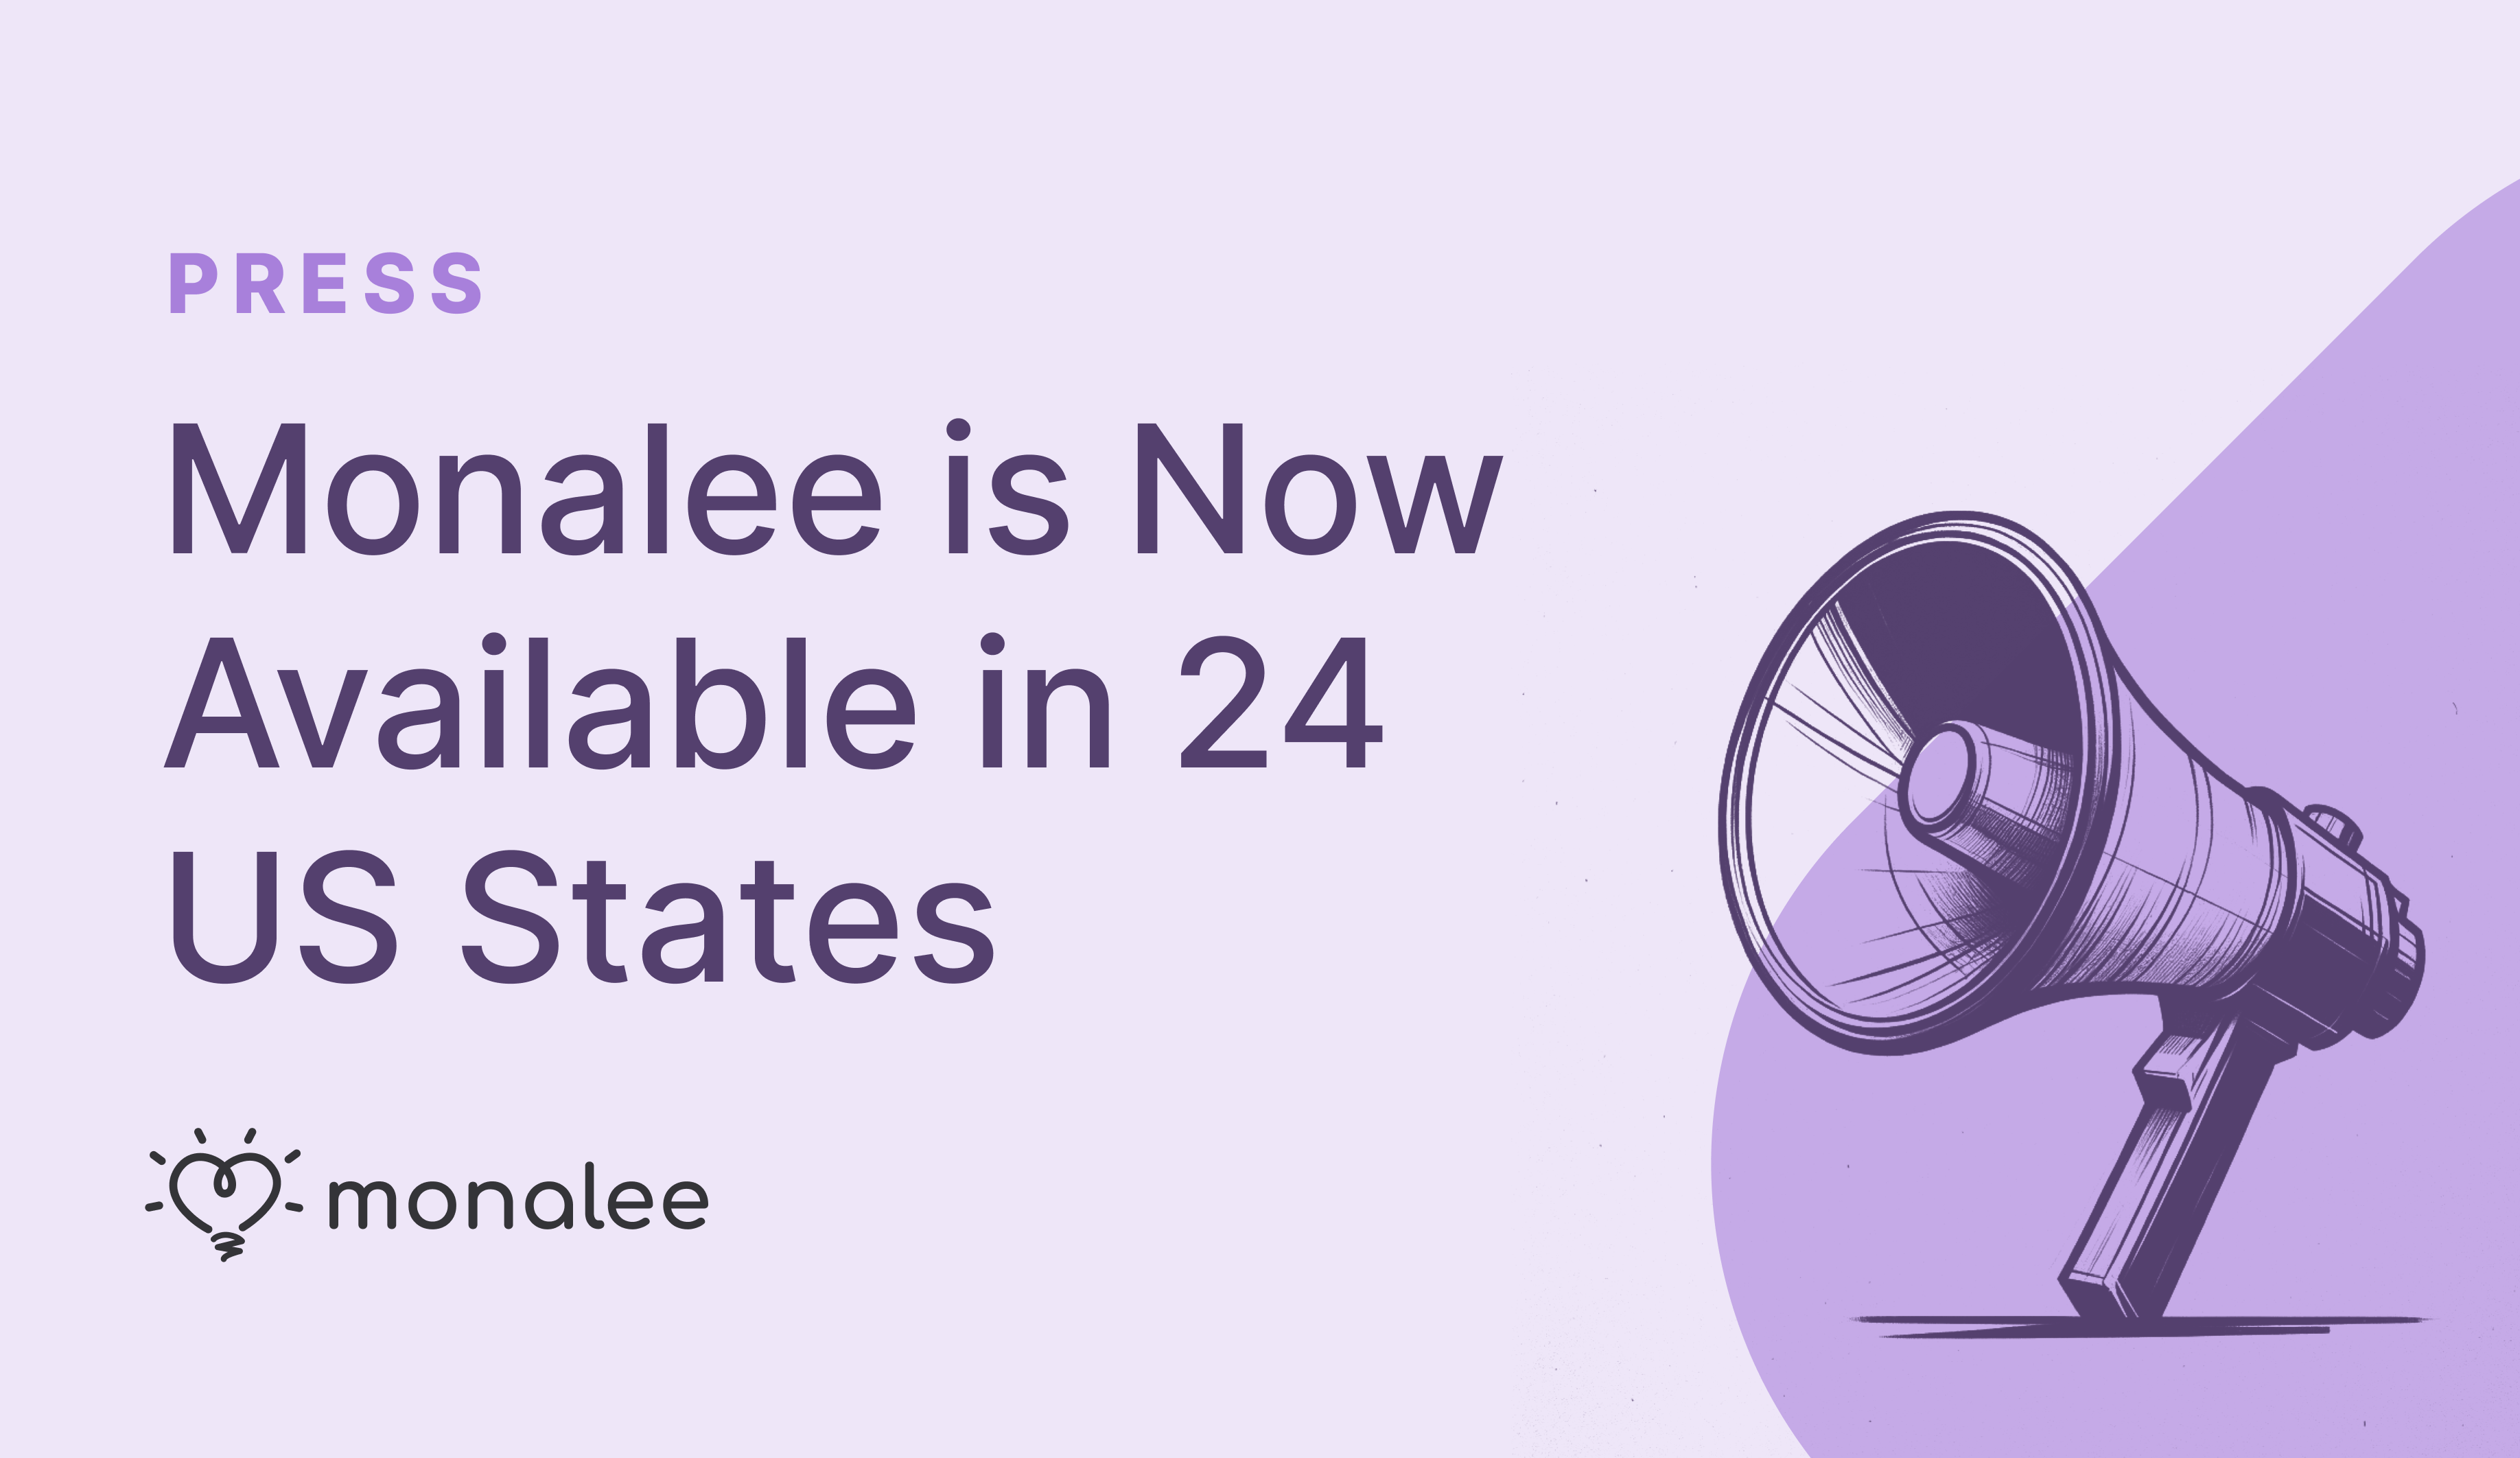 Monalee Expands to New Markets and is Now Available in 24 US States